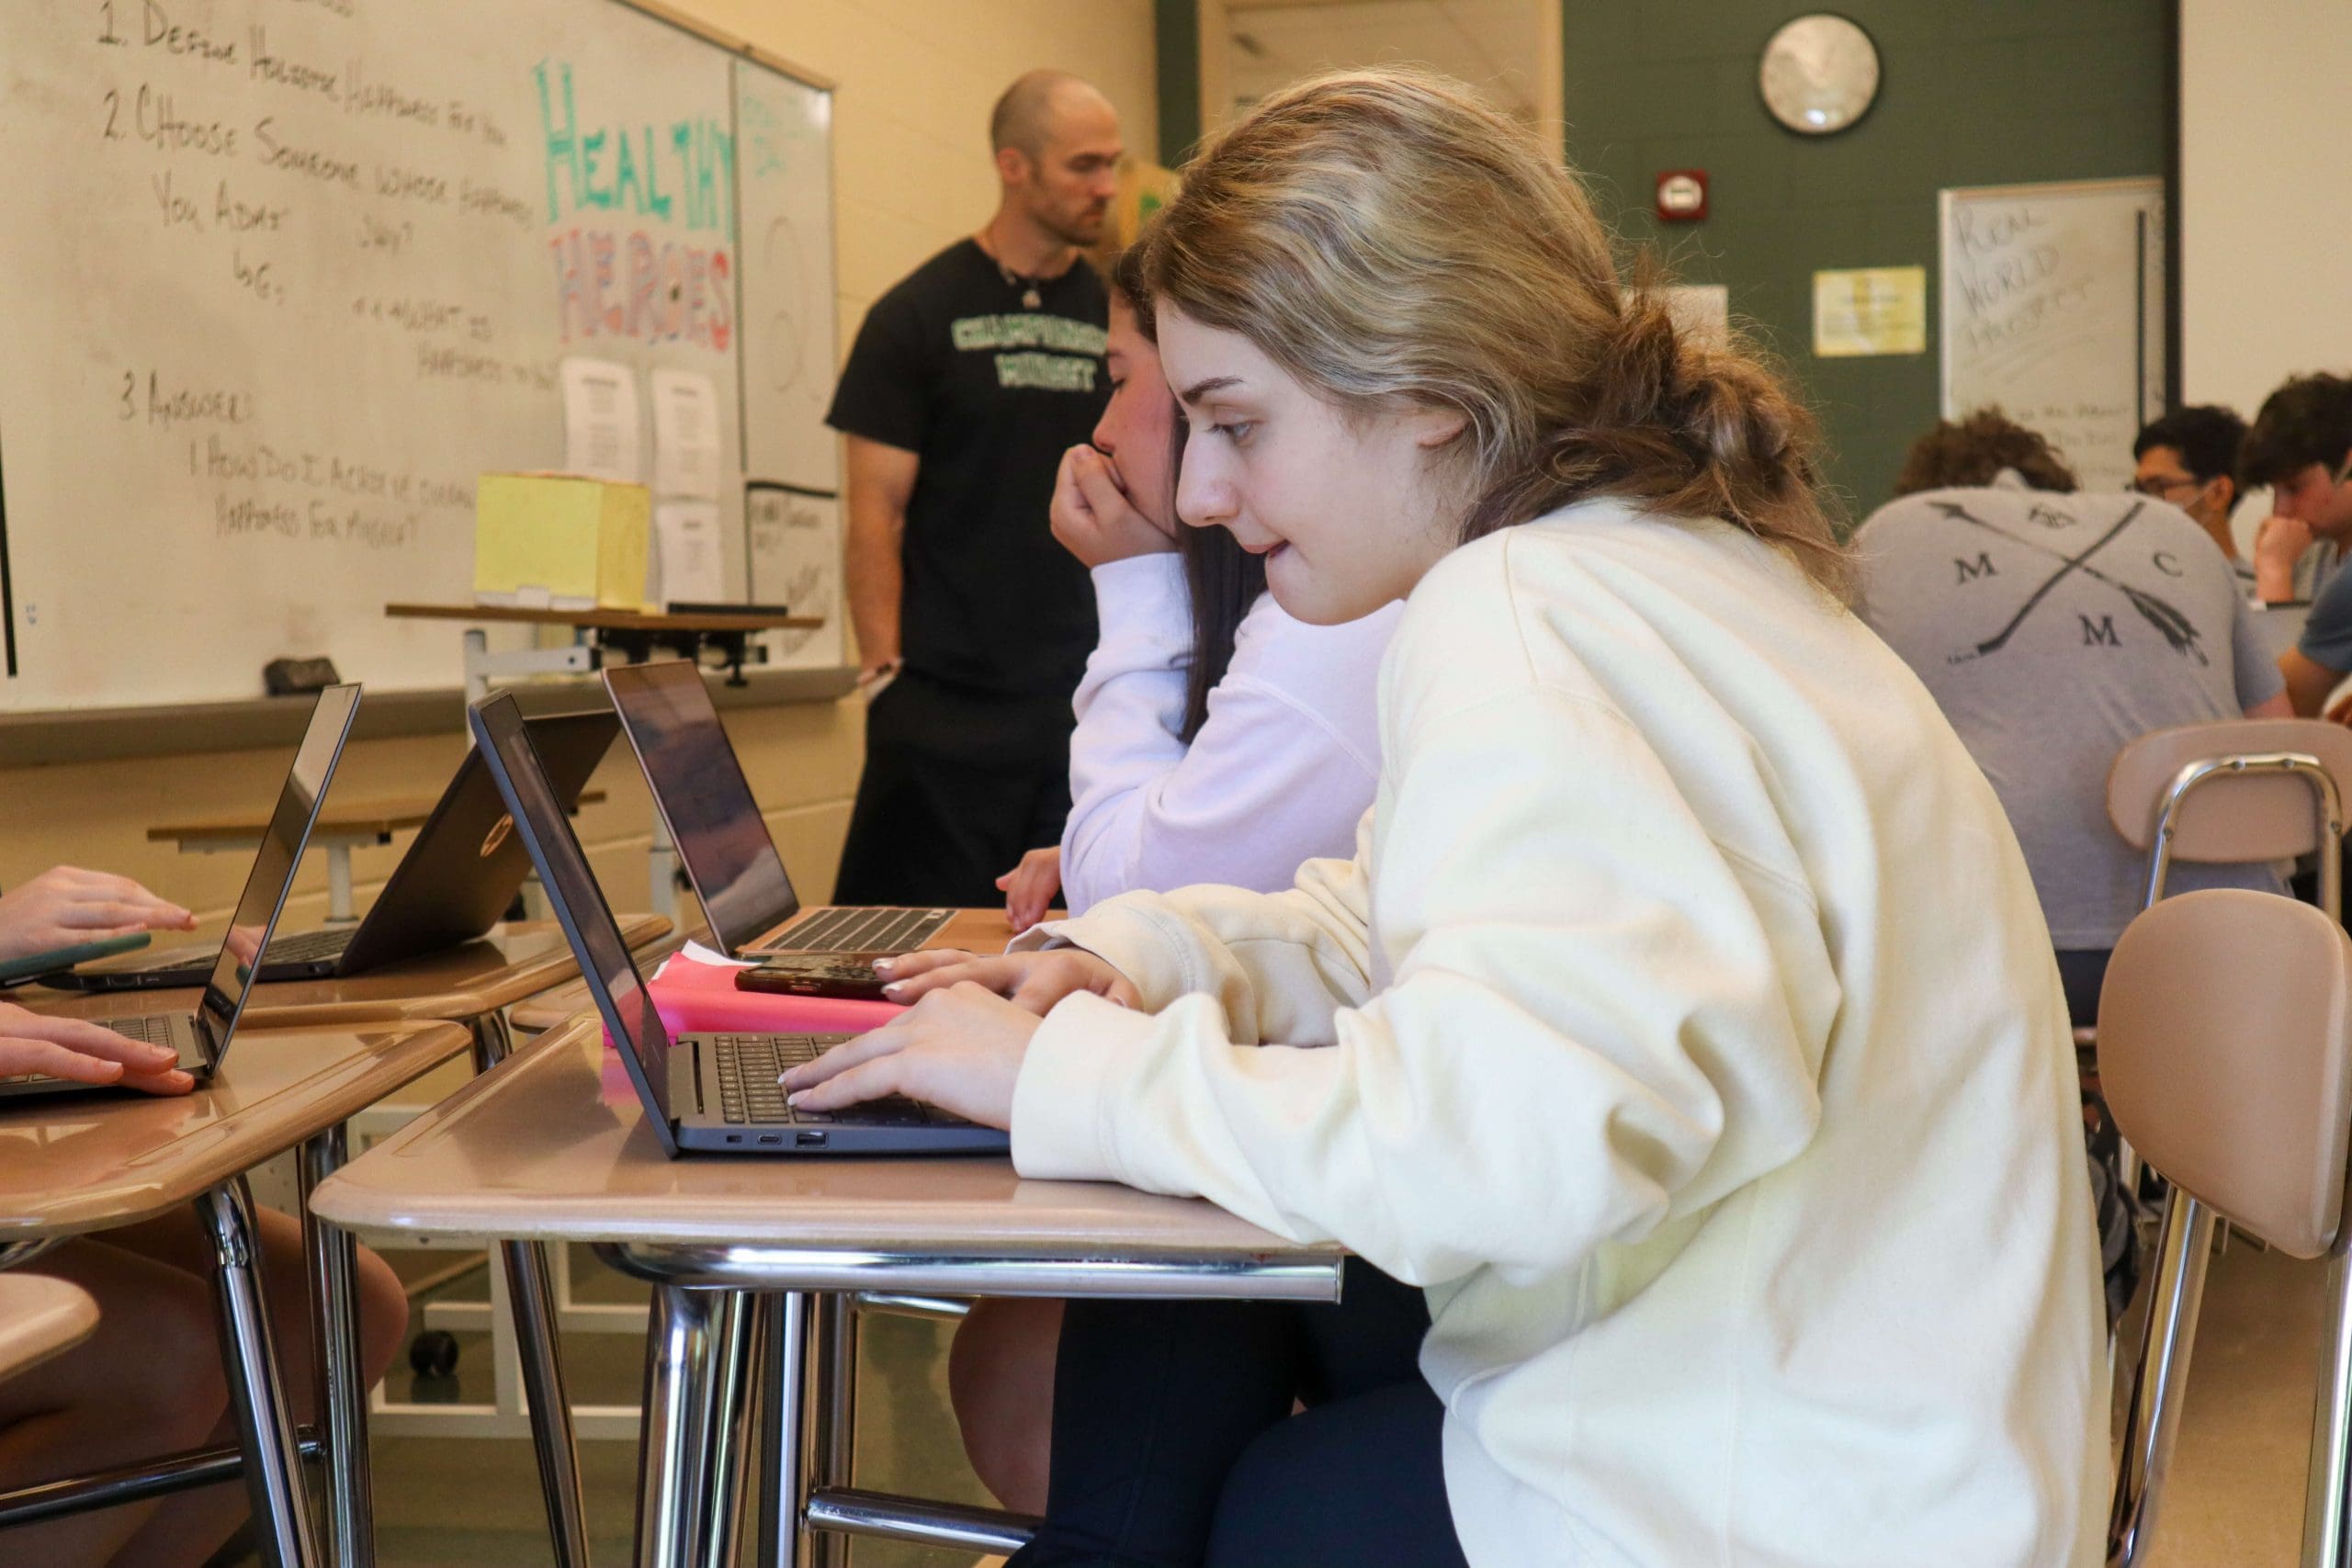 A student looks at their laptop during a physical education class.